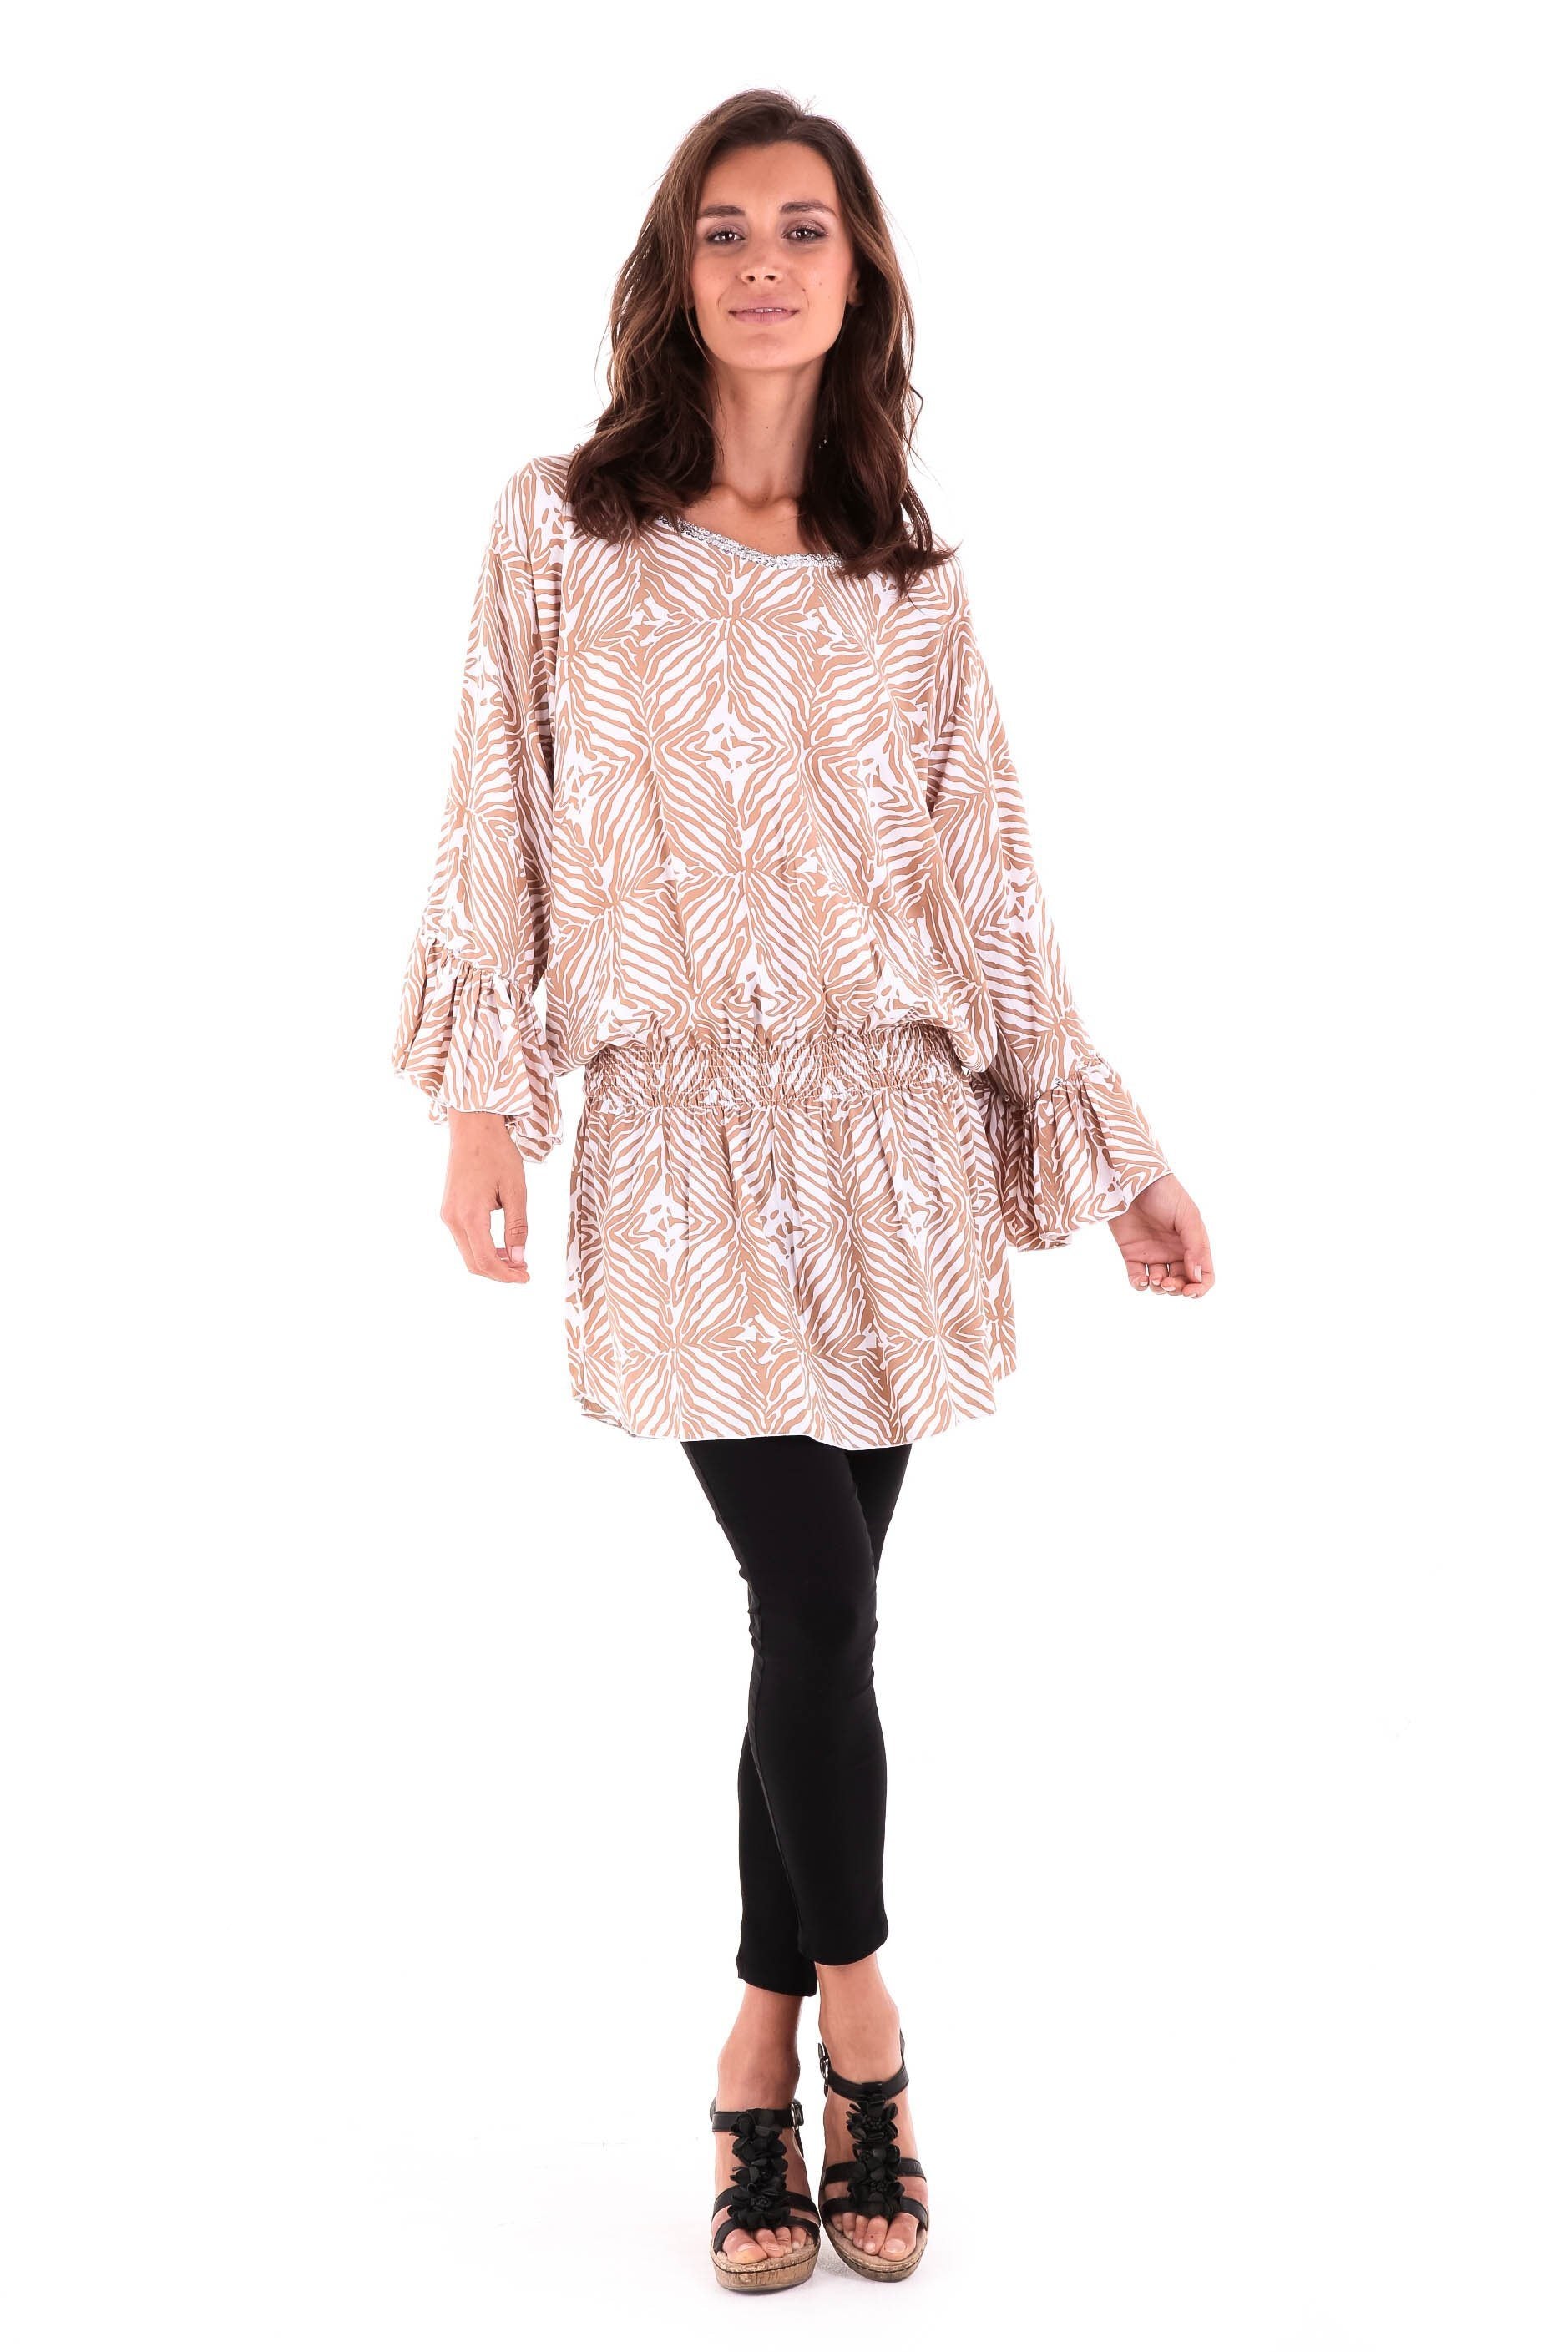 Tunic Top with Hand-Sewn Silver Sequins - Love-Shu-Shi